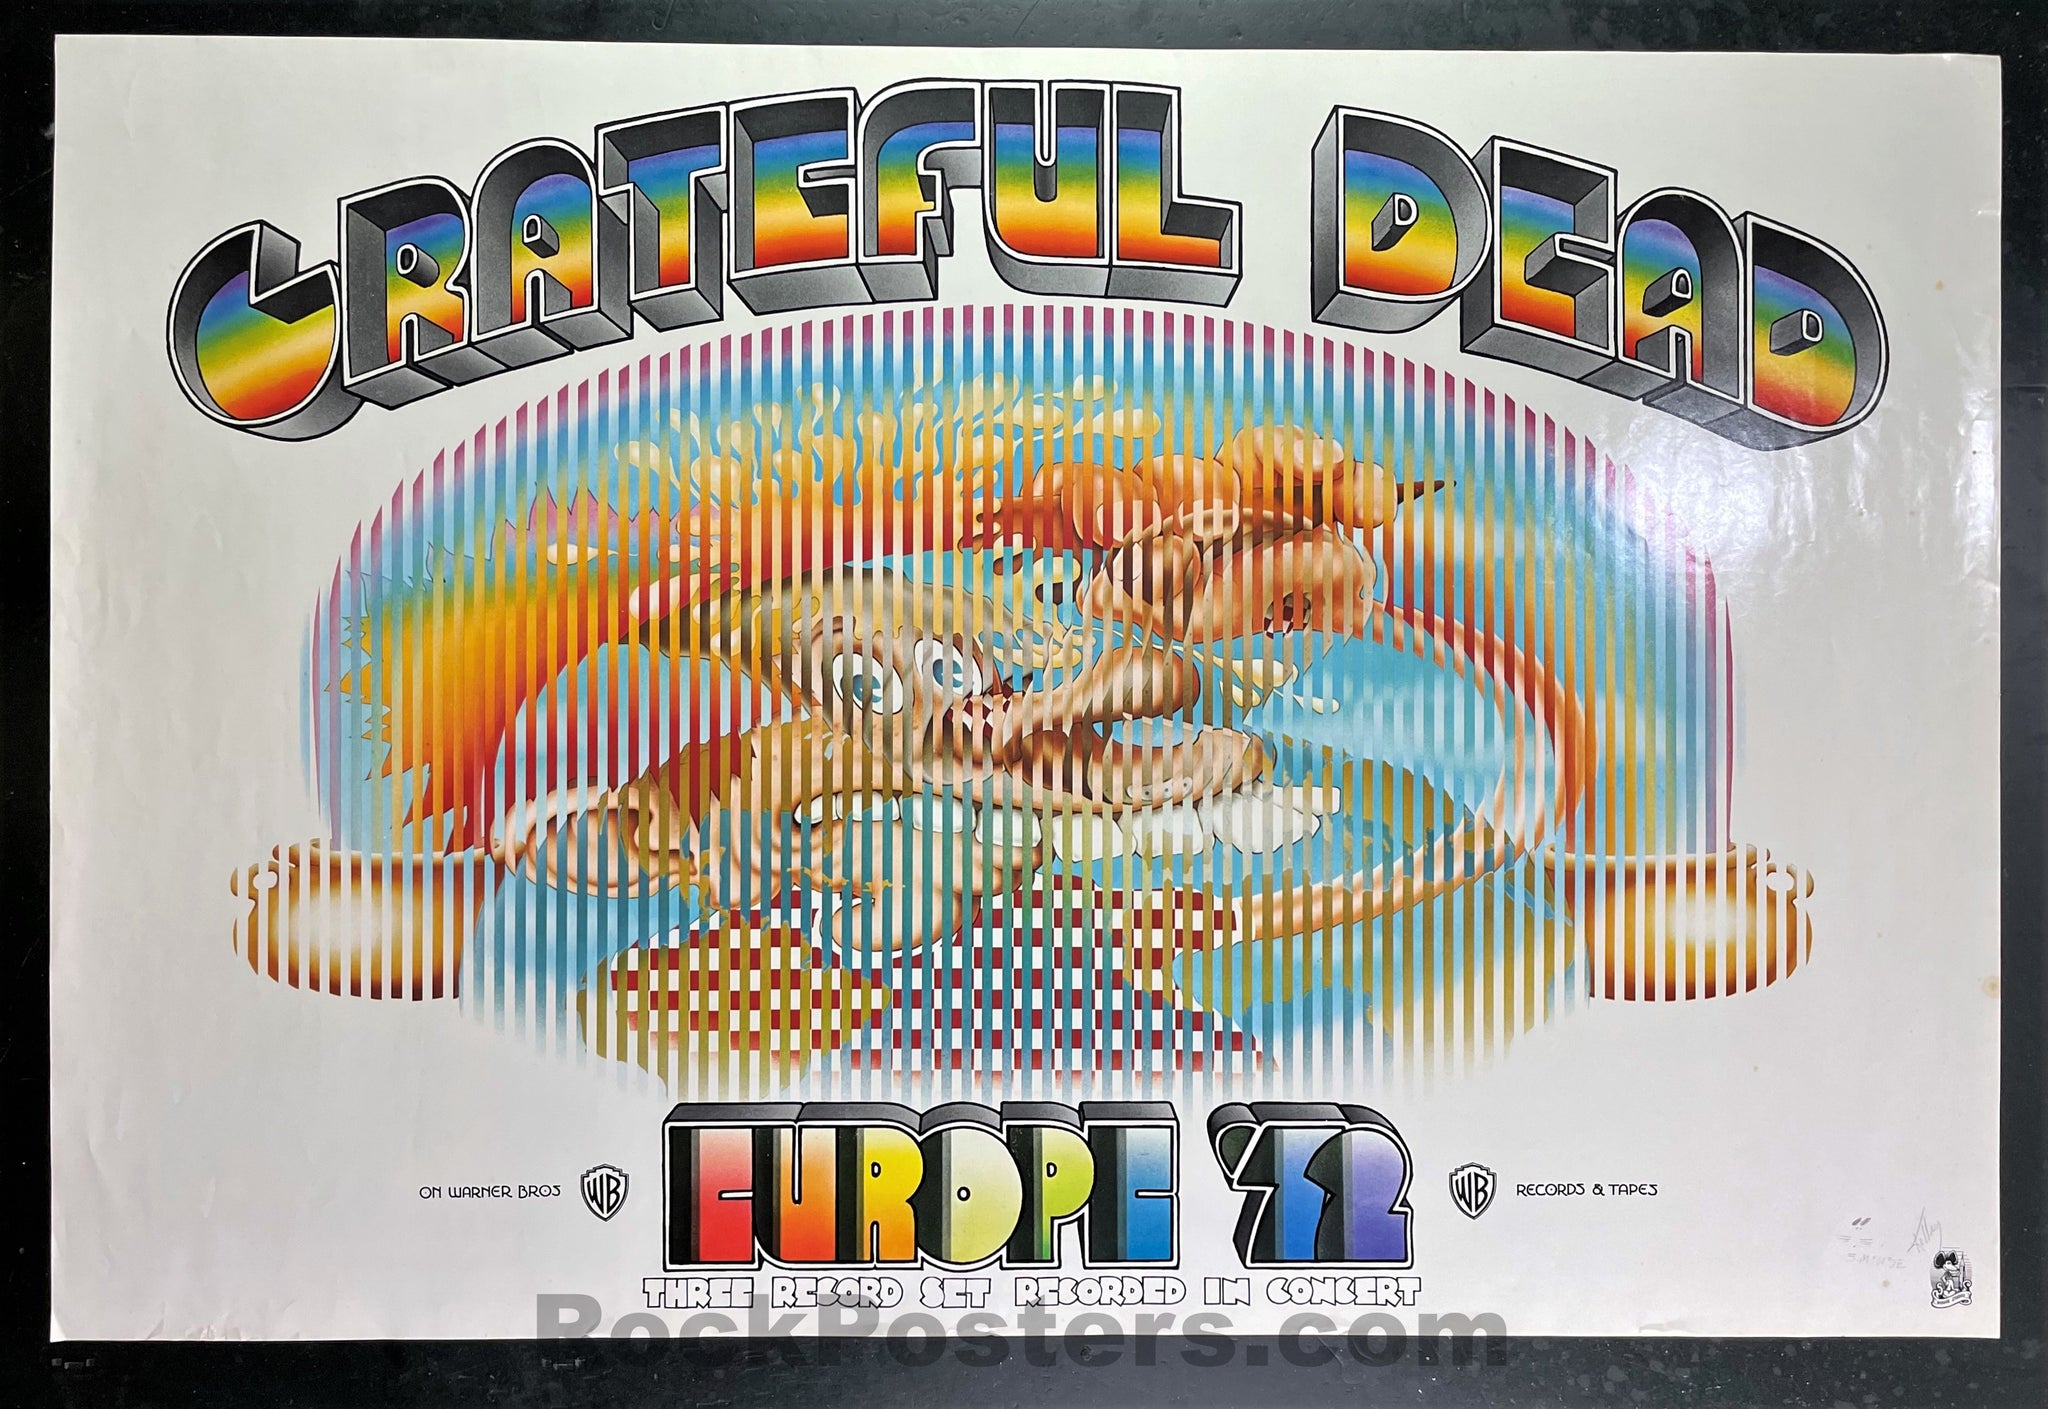 AUCTION - Alton Kelley Collection - Grateful Dead - Europe '72 - Mouse & Kelley SIGNED - Ice Cream Kid Poster - Excellent